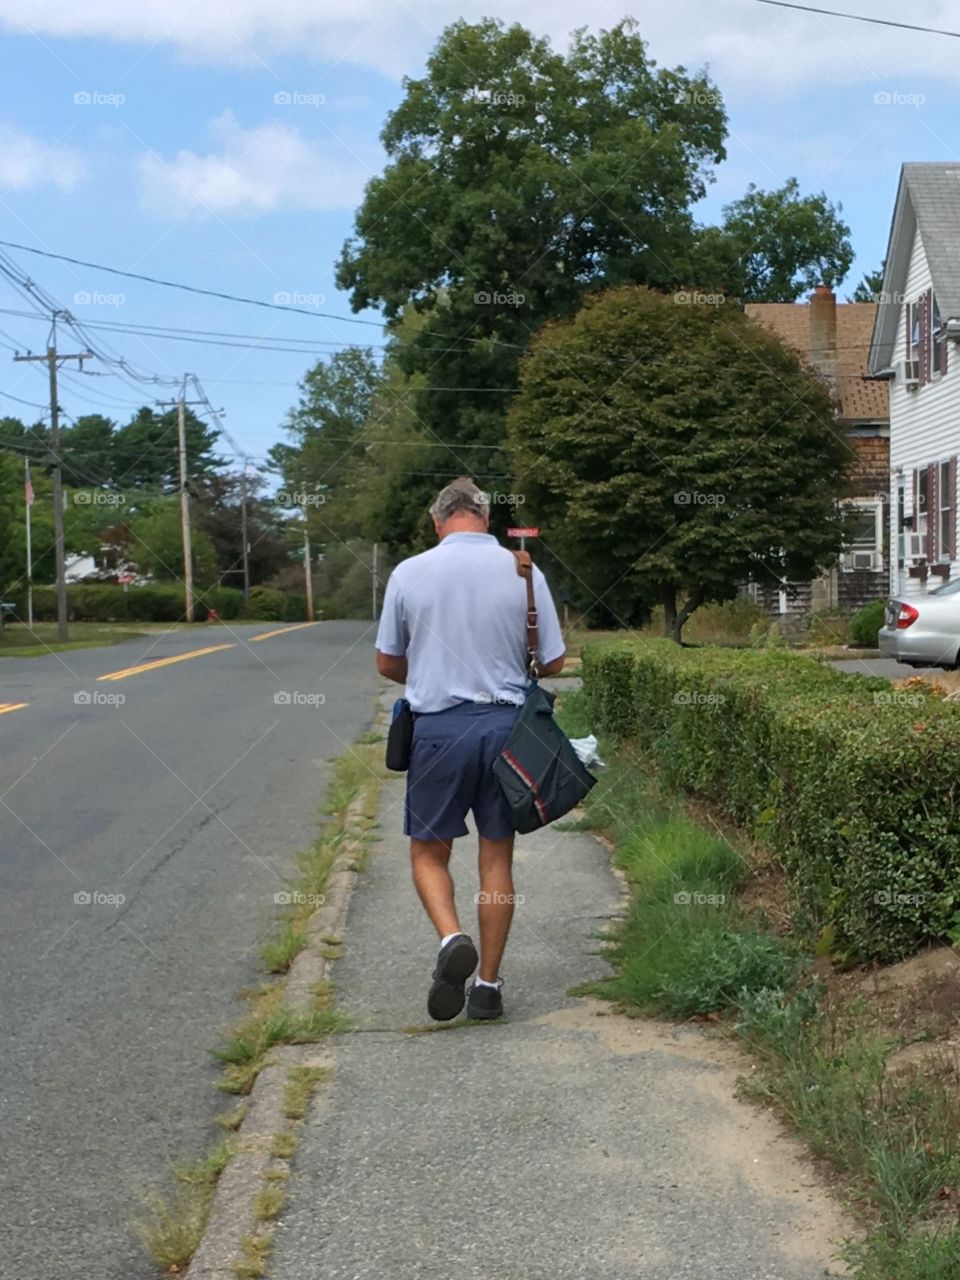 US Postal Service delivering mail to homes while walking.